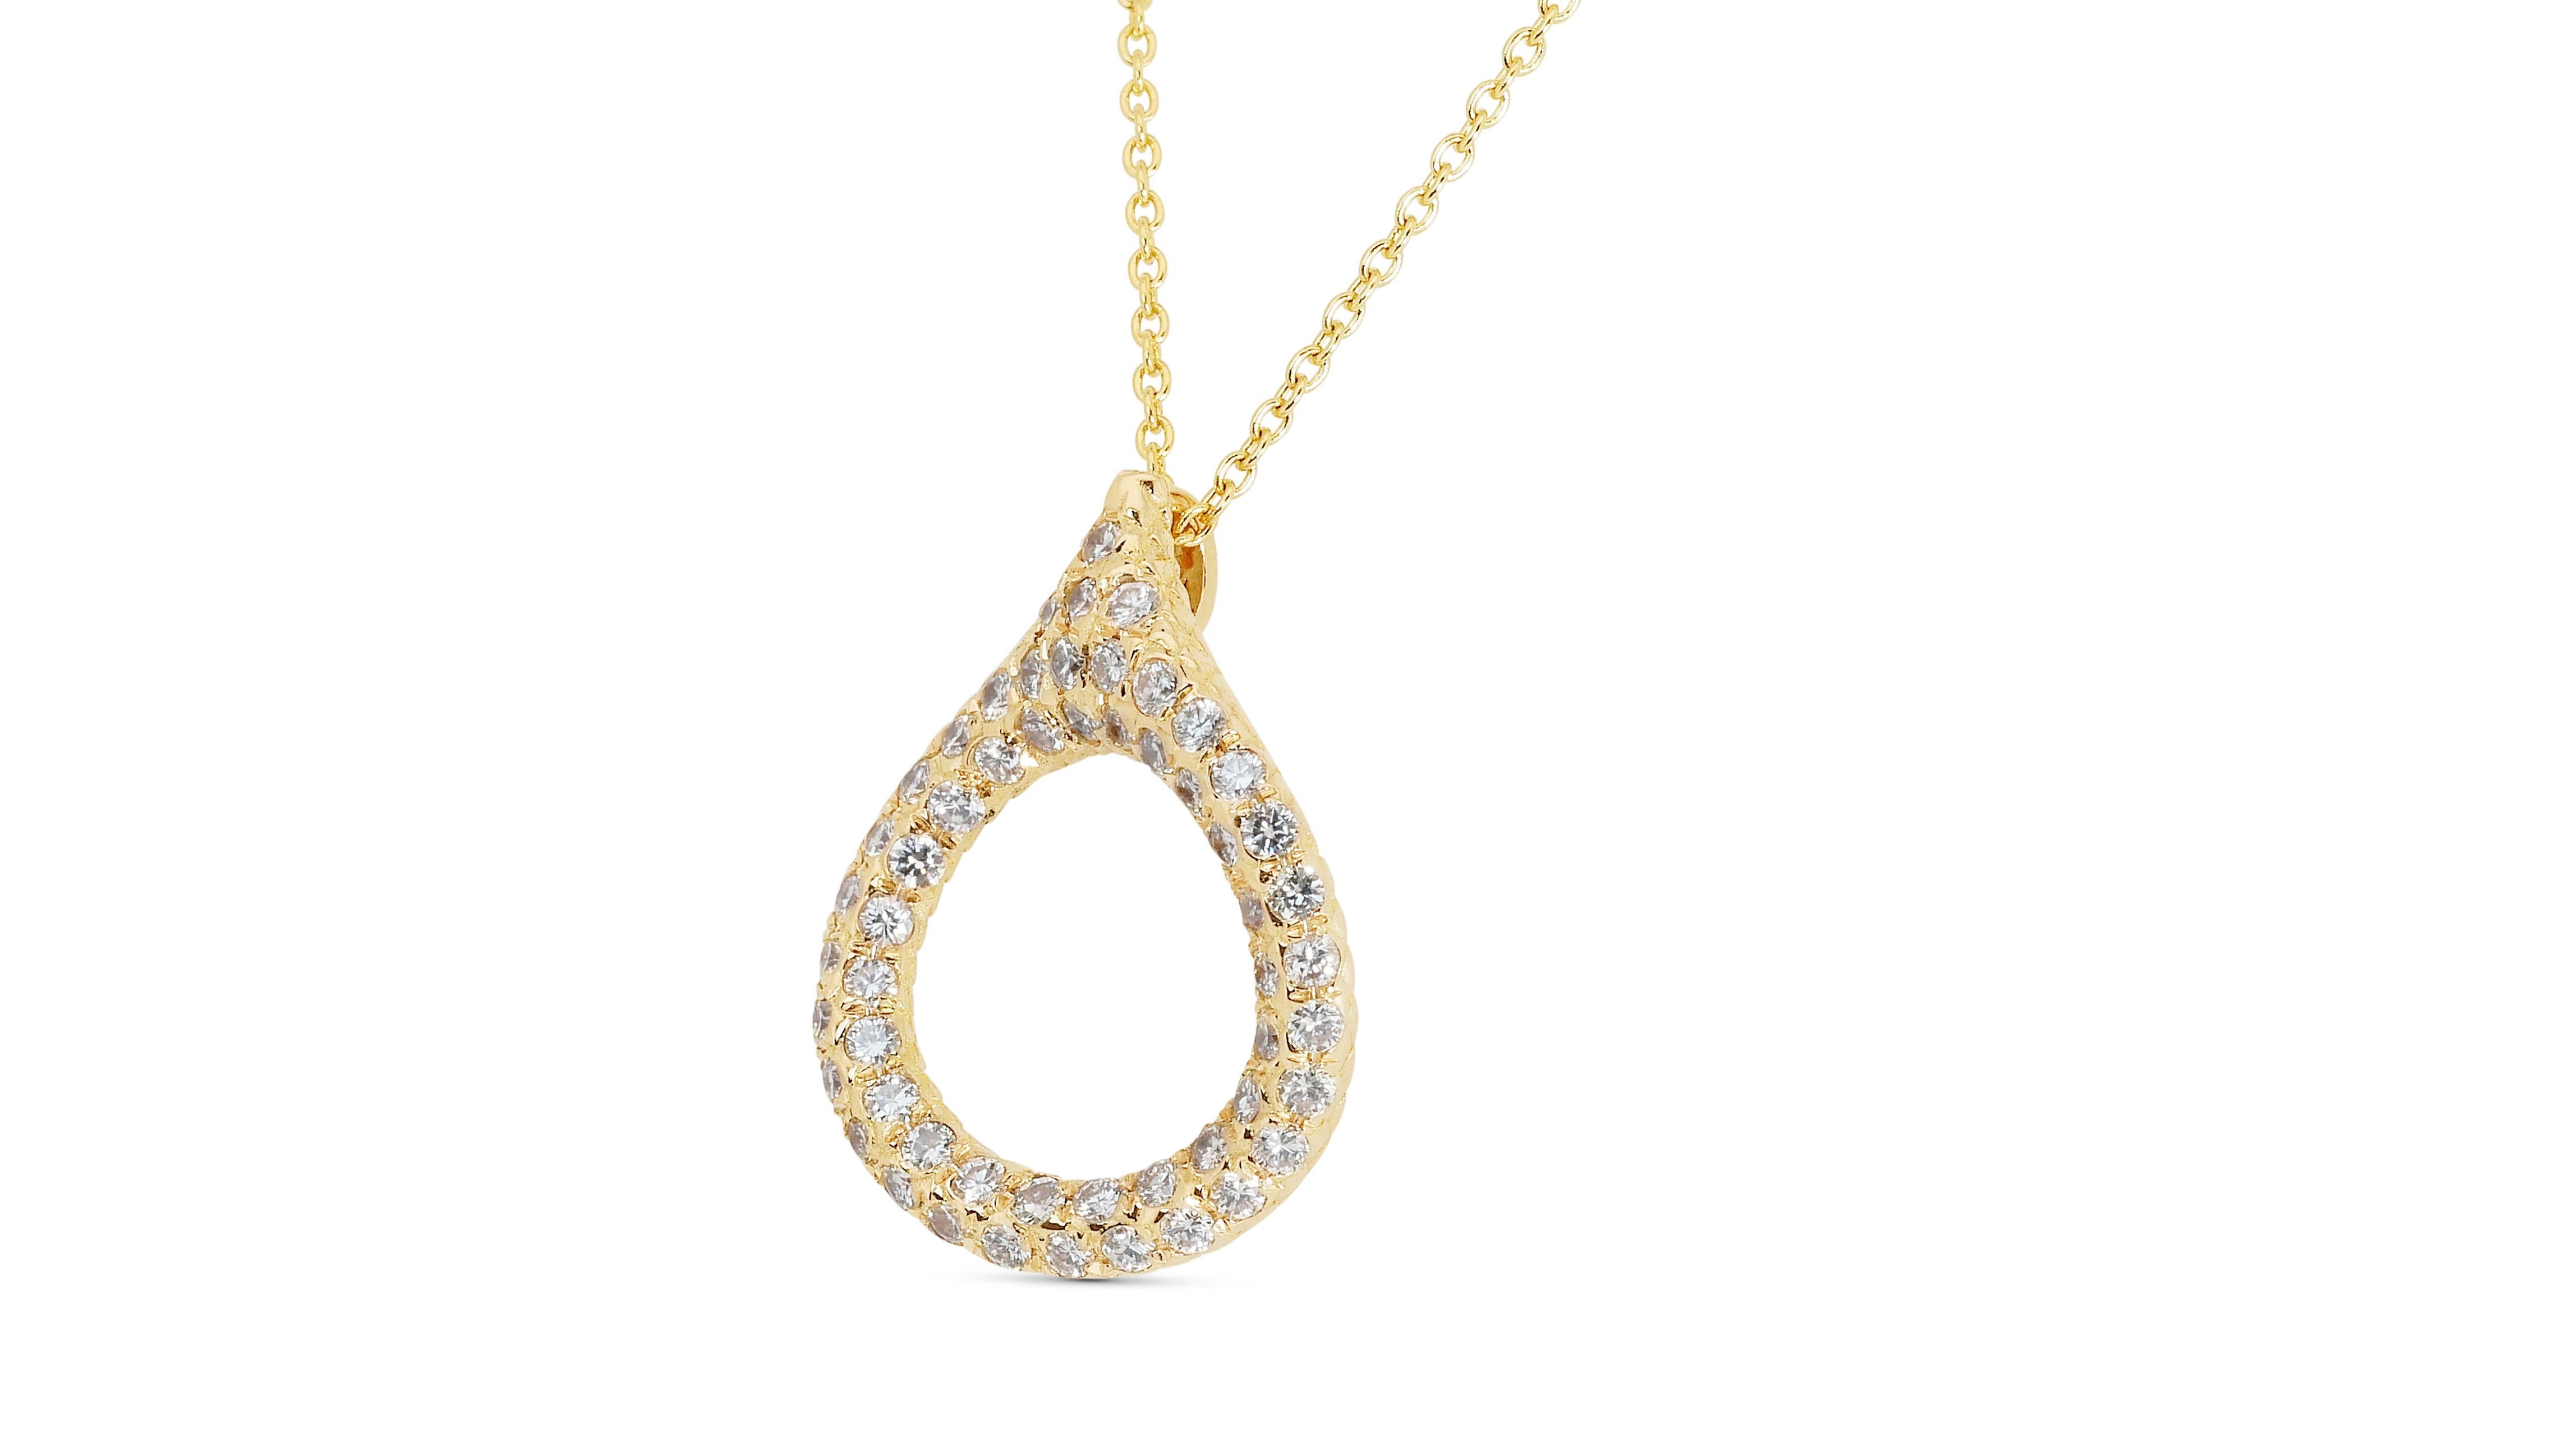 Dazzling 18k Yellow Gold Necklace w/ 1.16 Carat Natural Diamonds IGI Certificate In New Condition For Sale In רמת גן, IL